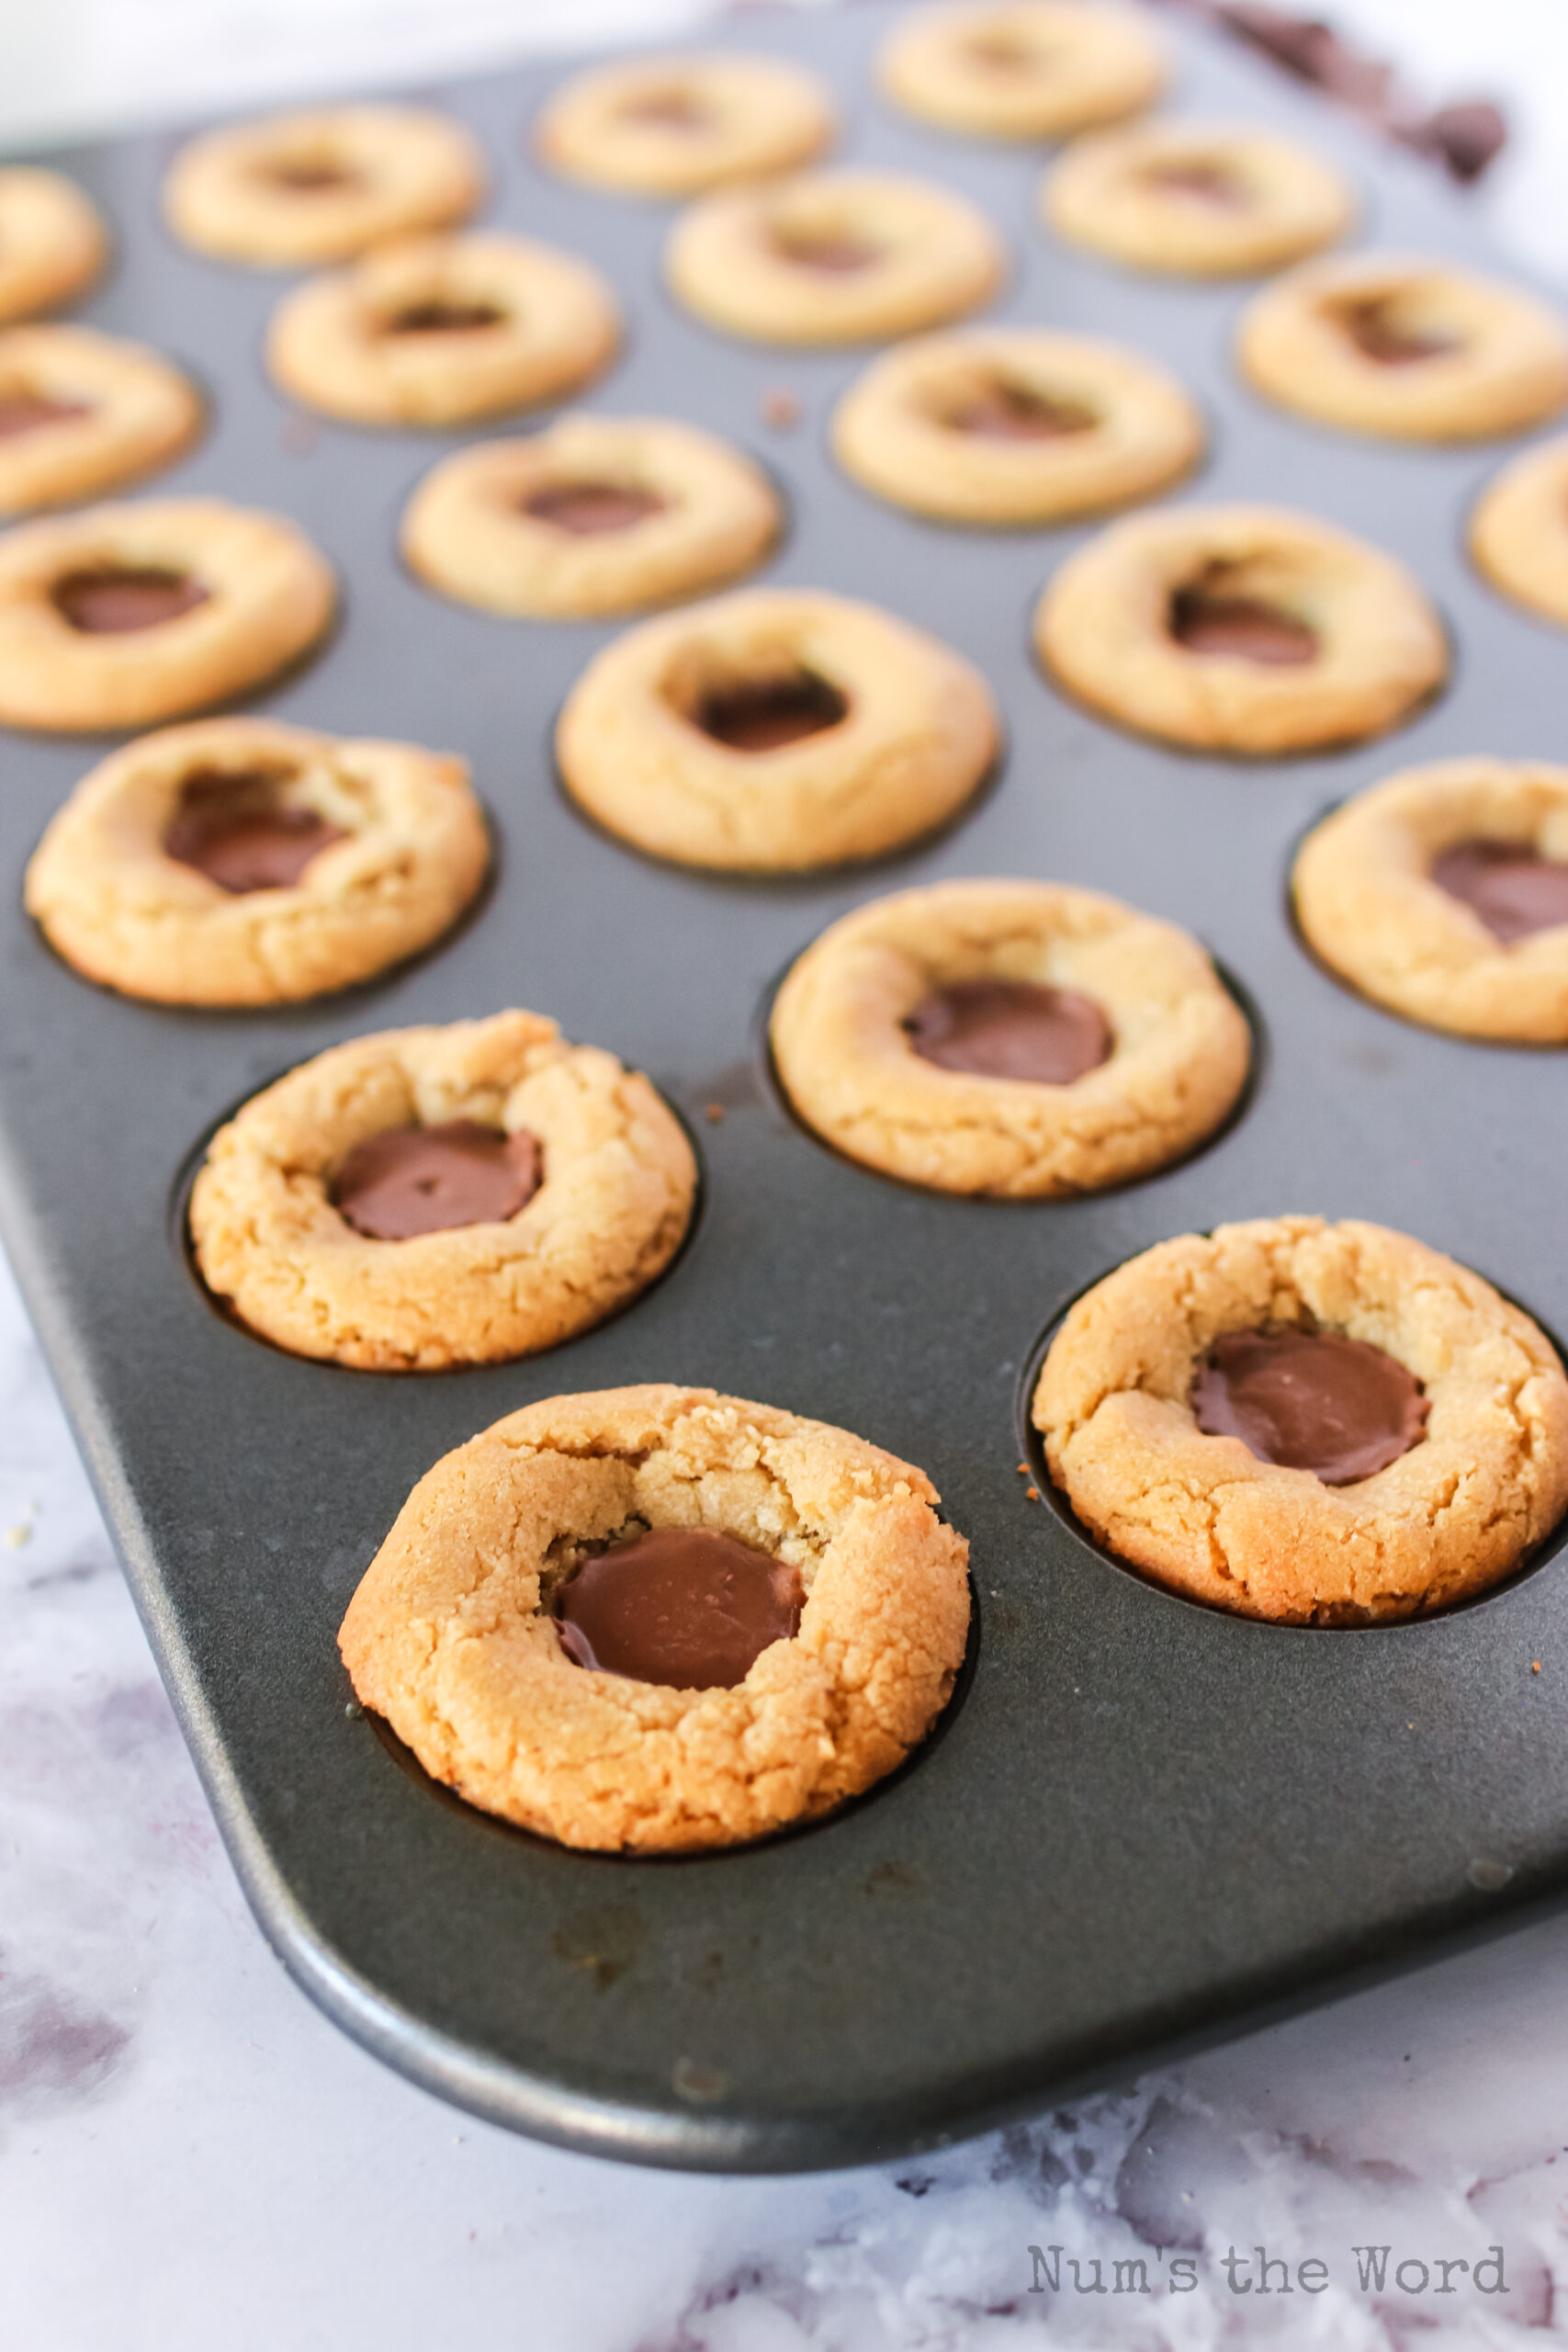 Baked peanut butter cookie cups in pan ready to pop out and eat